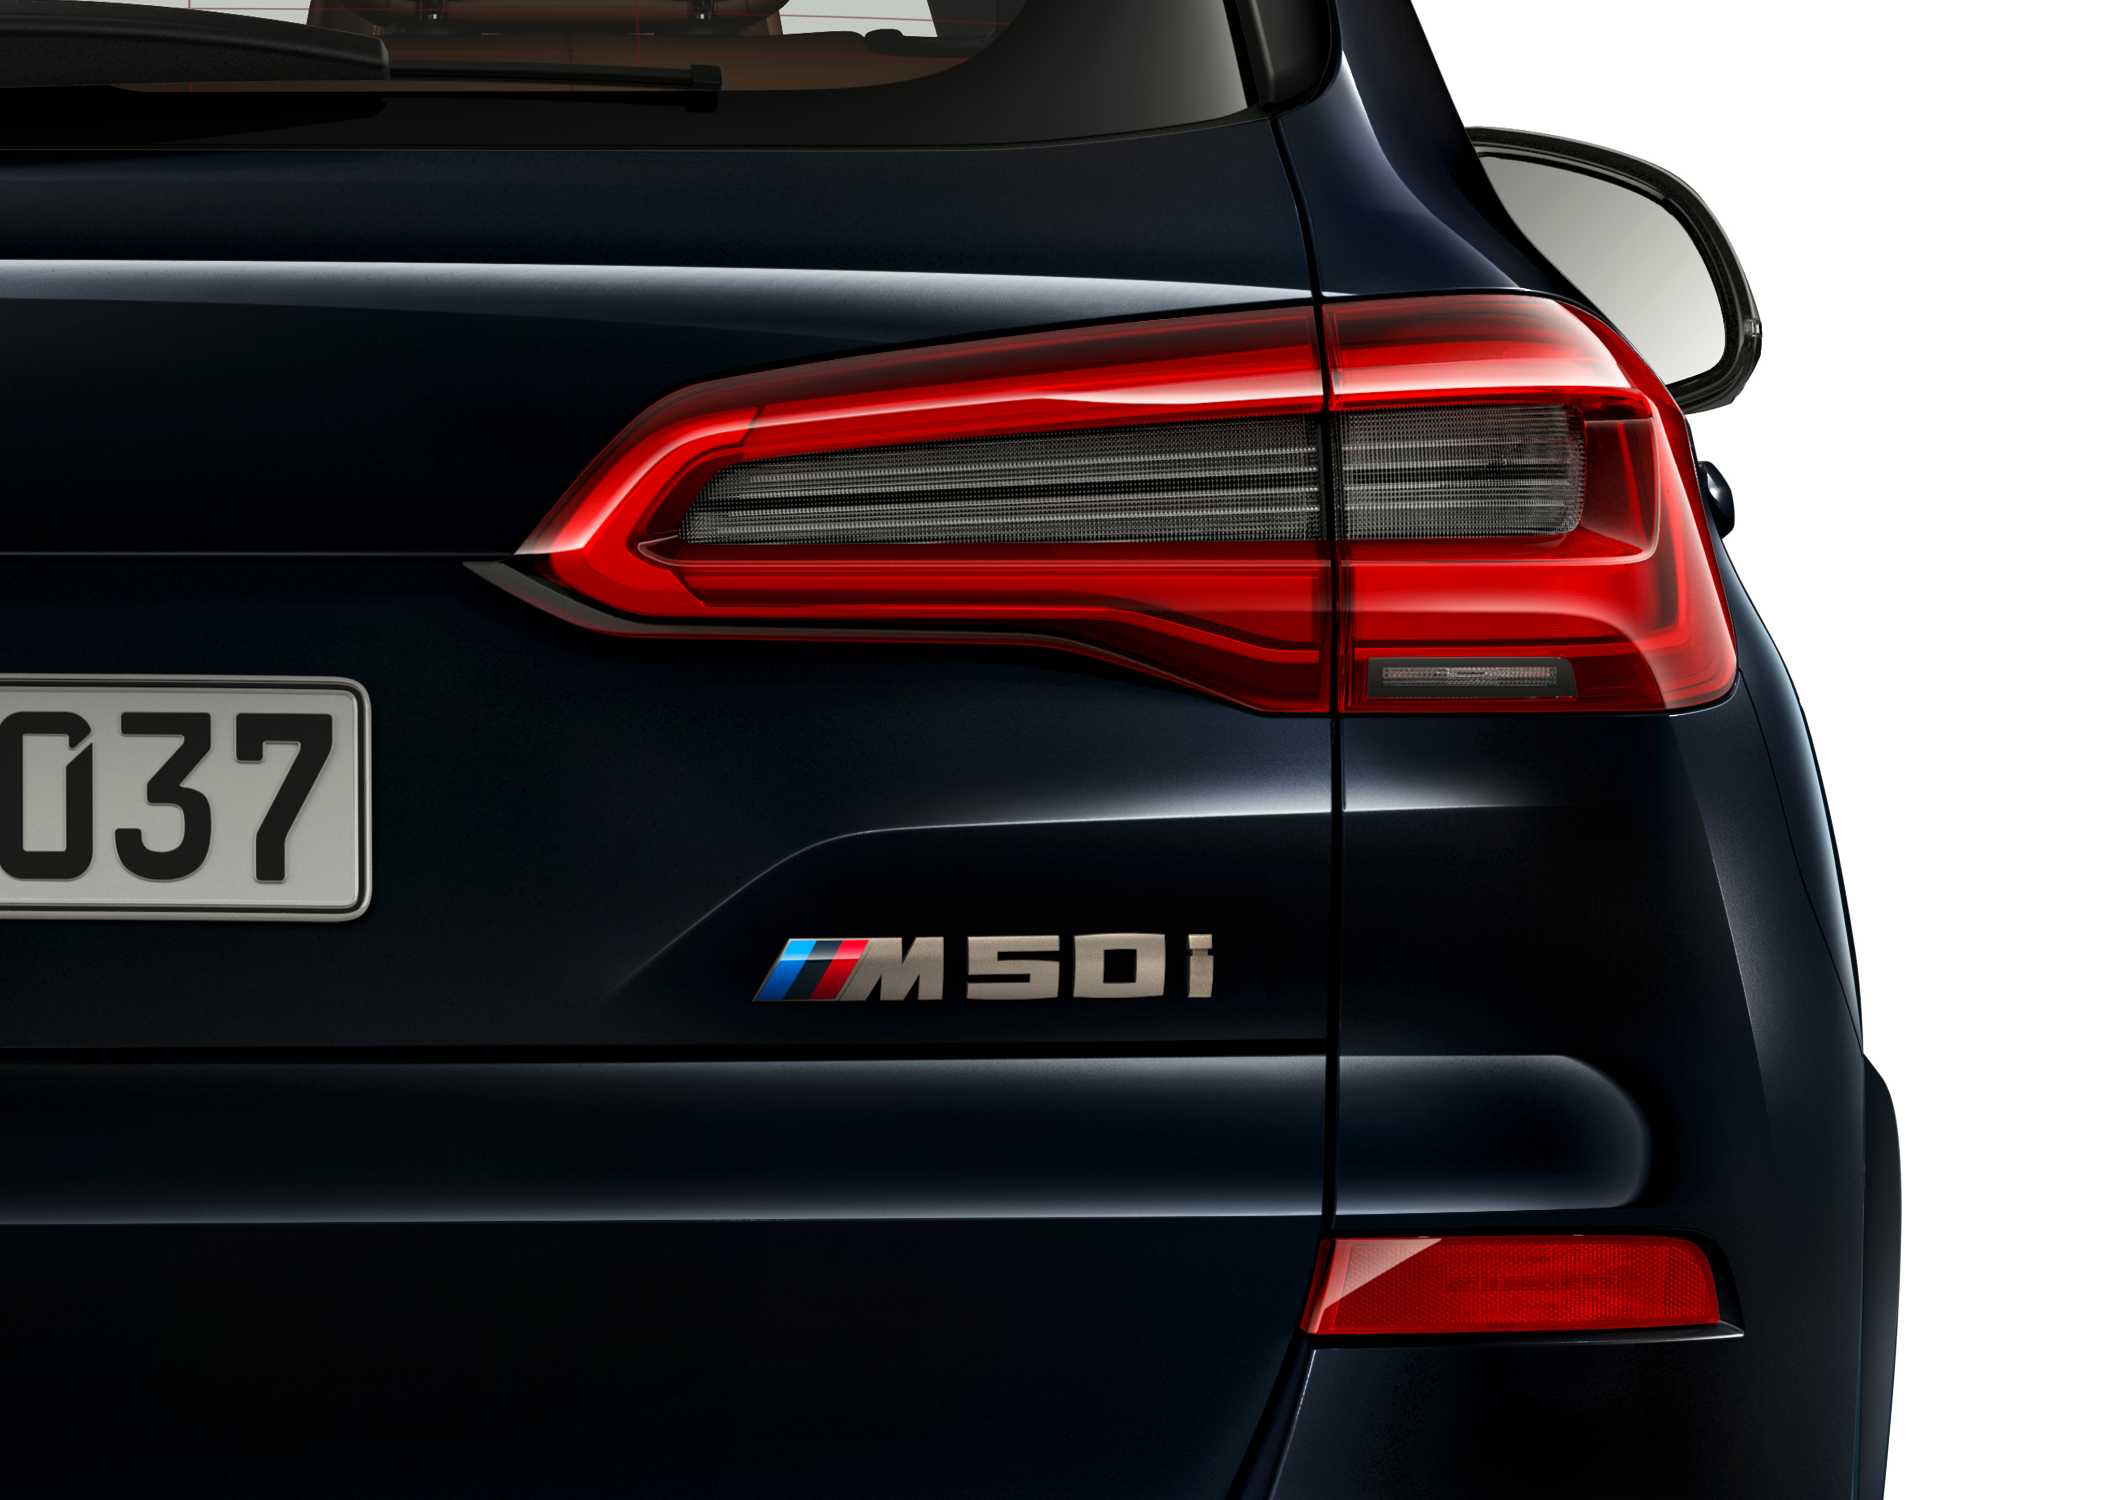 The new BMW X5 M50i (05/2019).